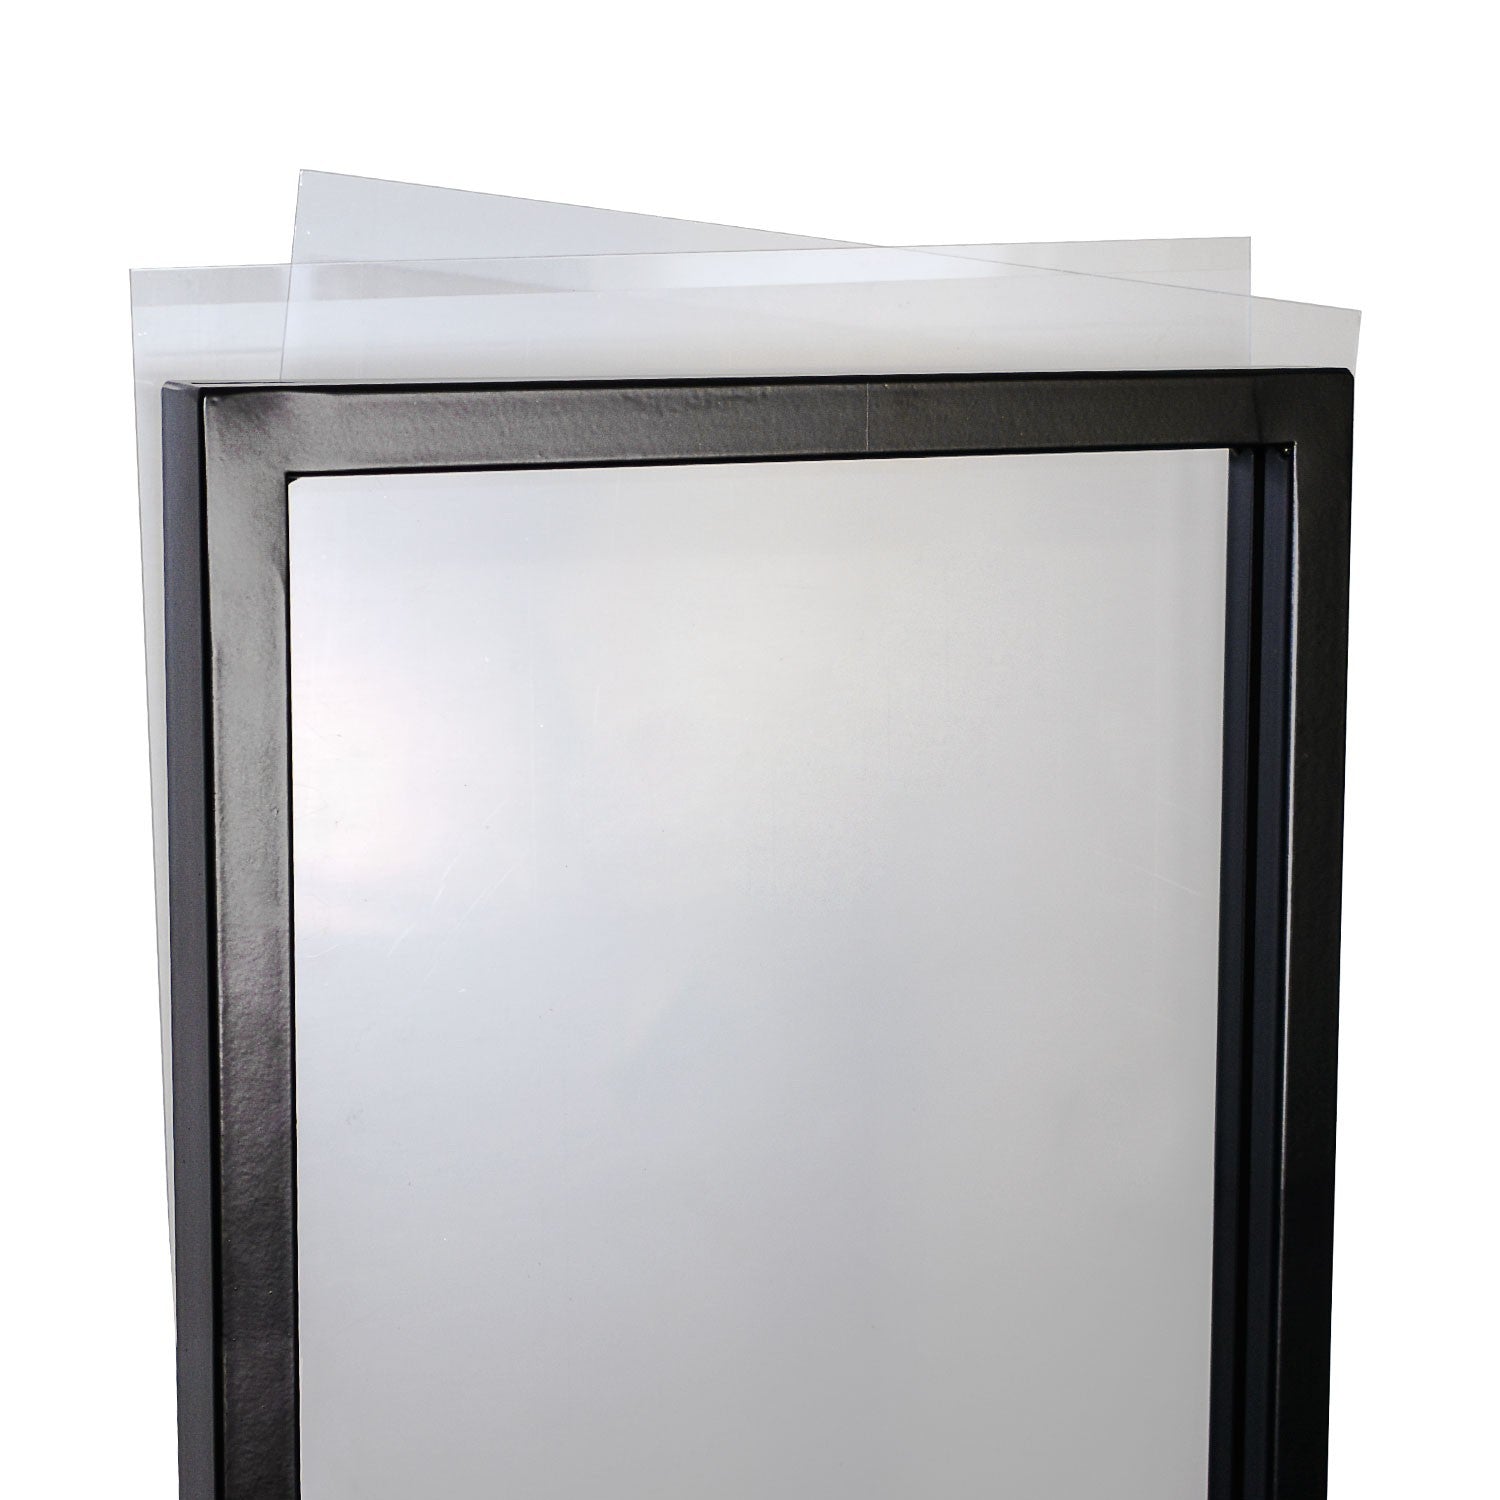 Replacement Glass for Picture Frames: Crystal Clear, 8.5x11, 3